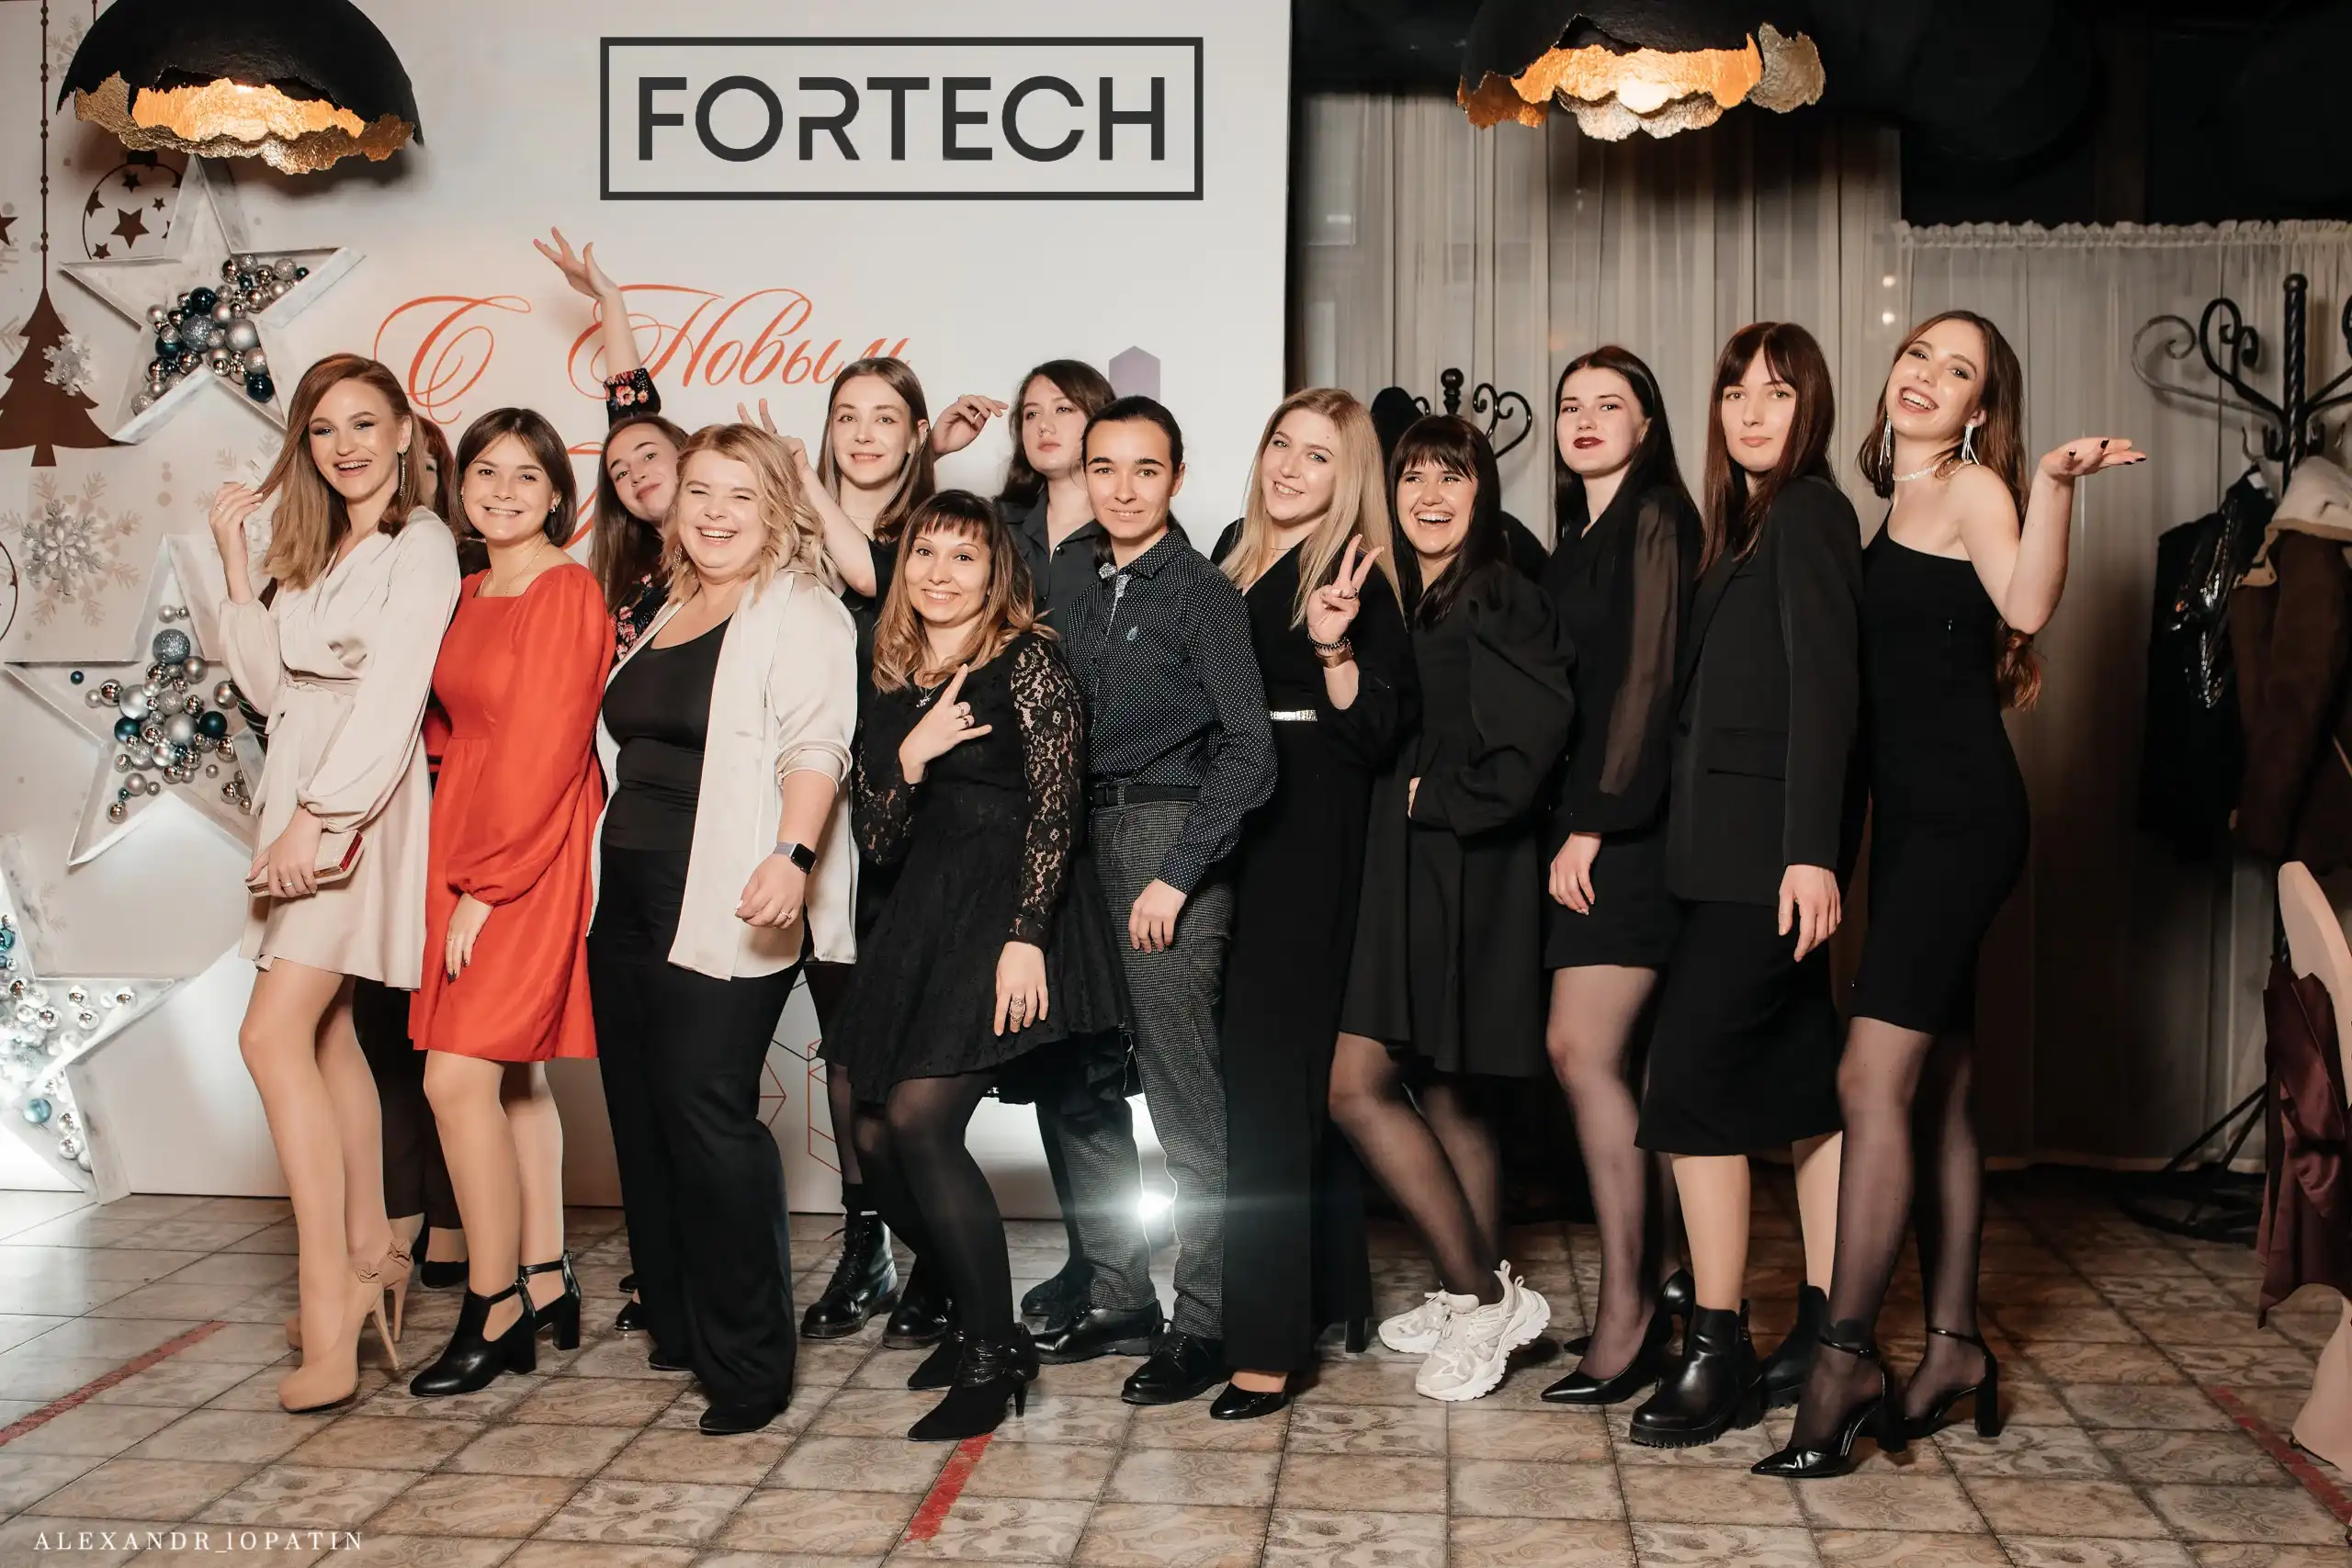 Photo from Fortech's photo album